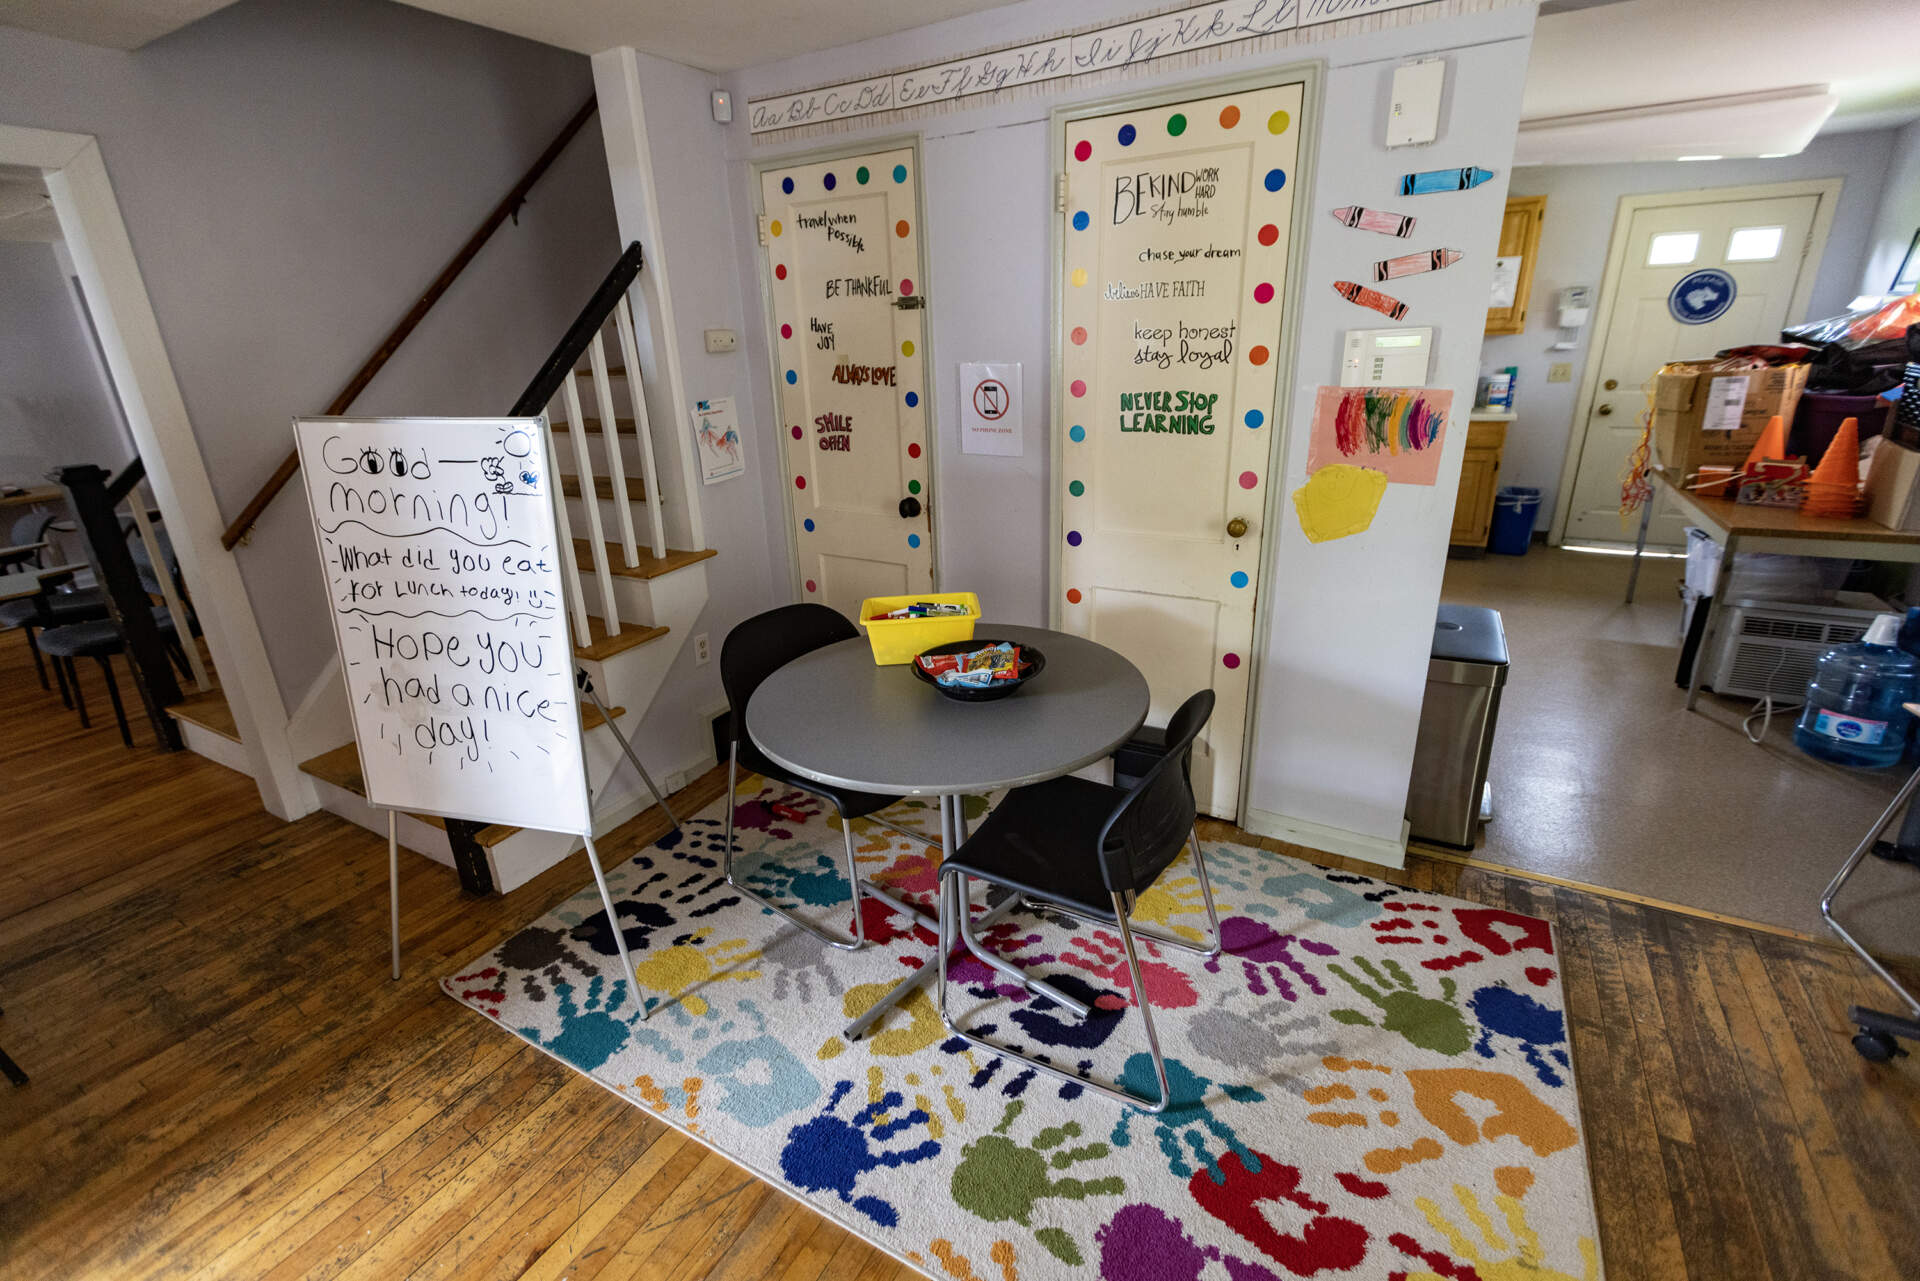 One of two public housing units at the Green Acres development in Fitchburg that are used for after-school programs. (Jesse Costa/WBUR)